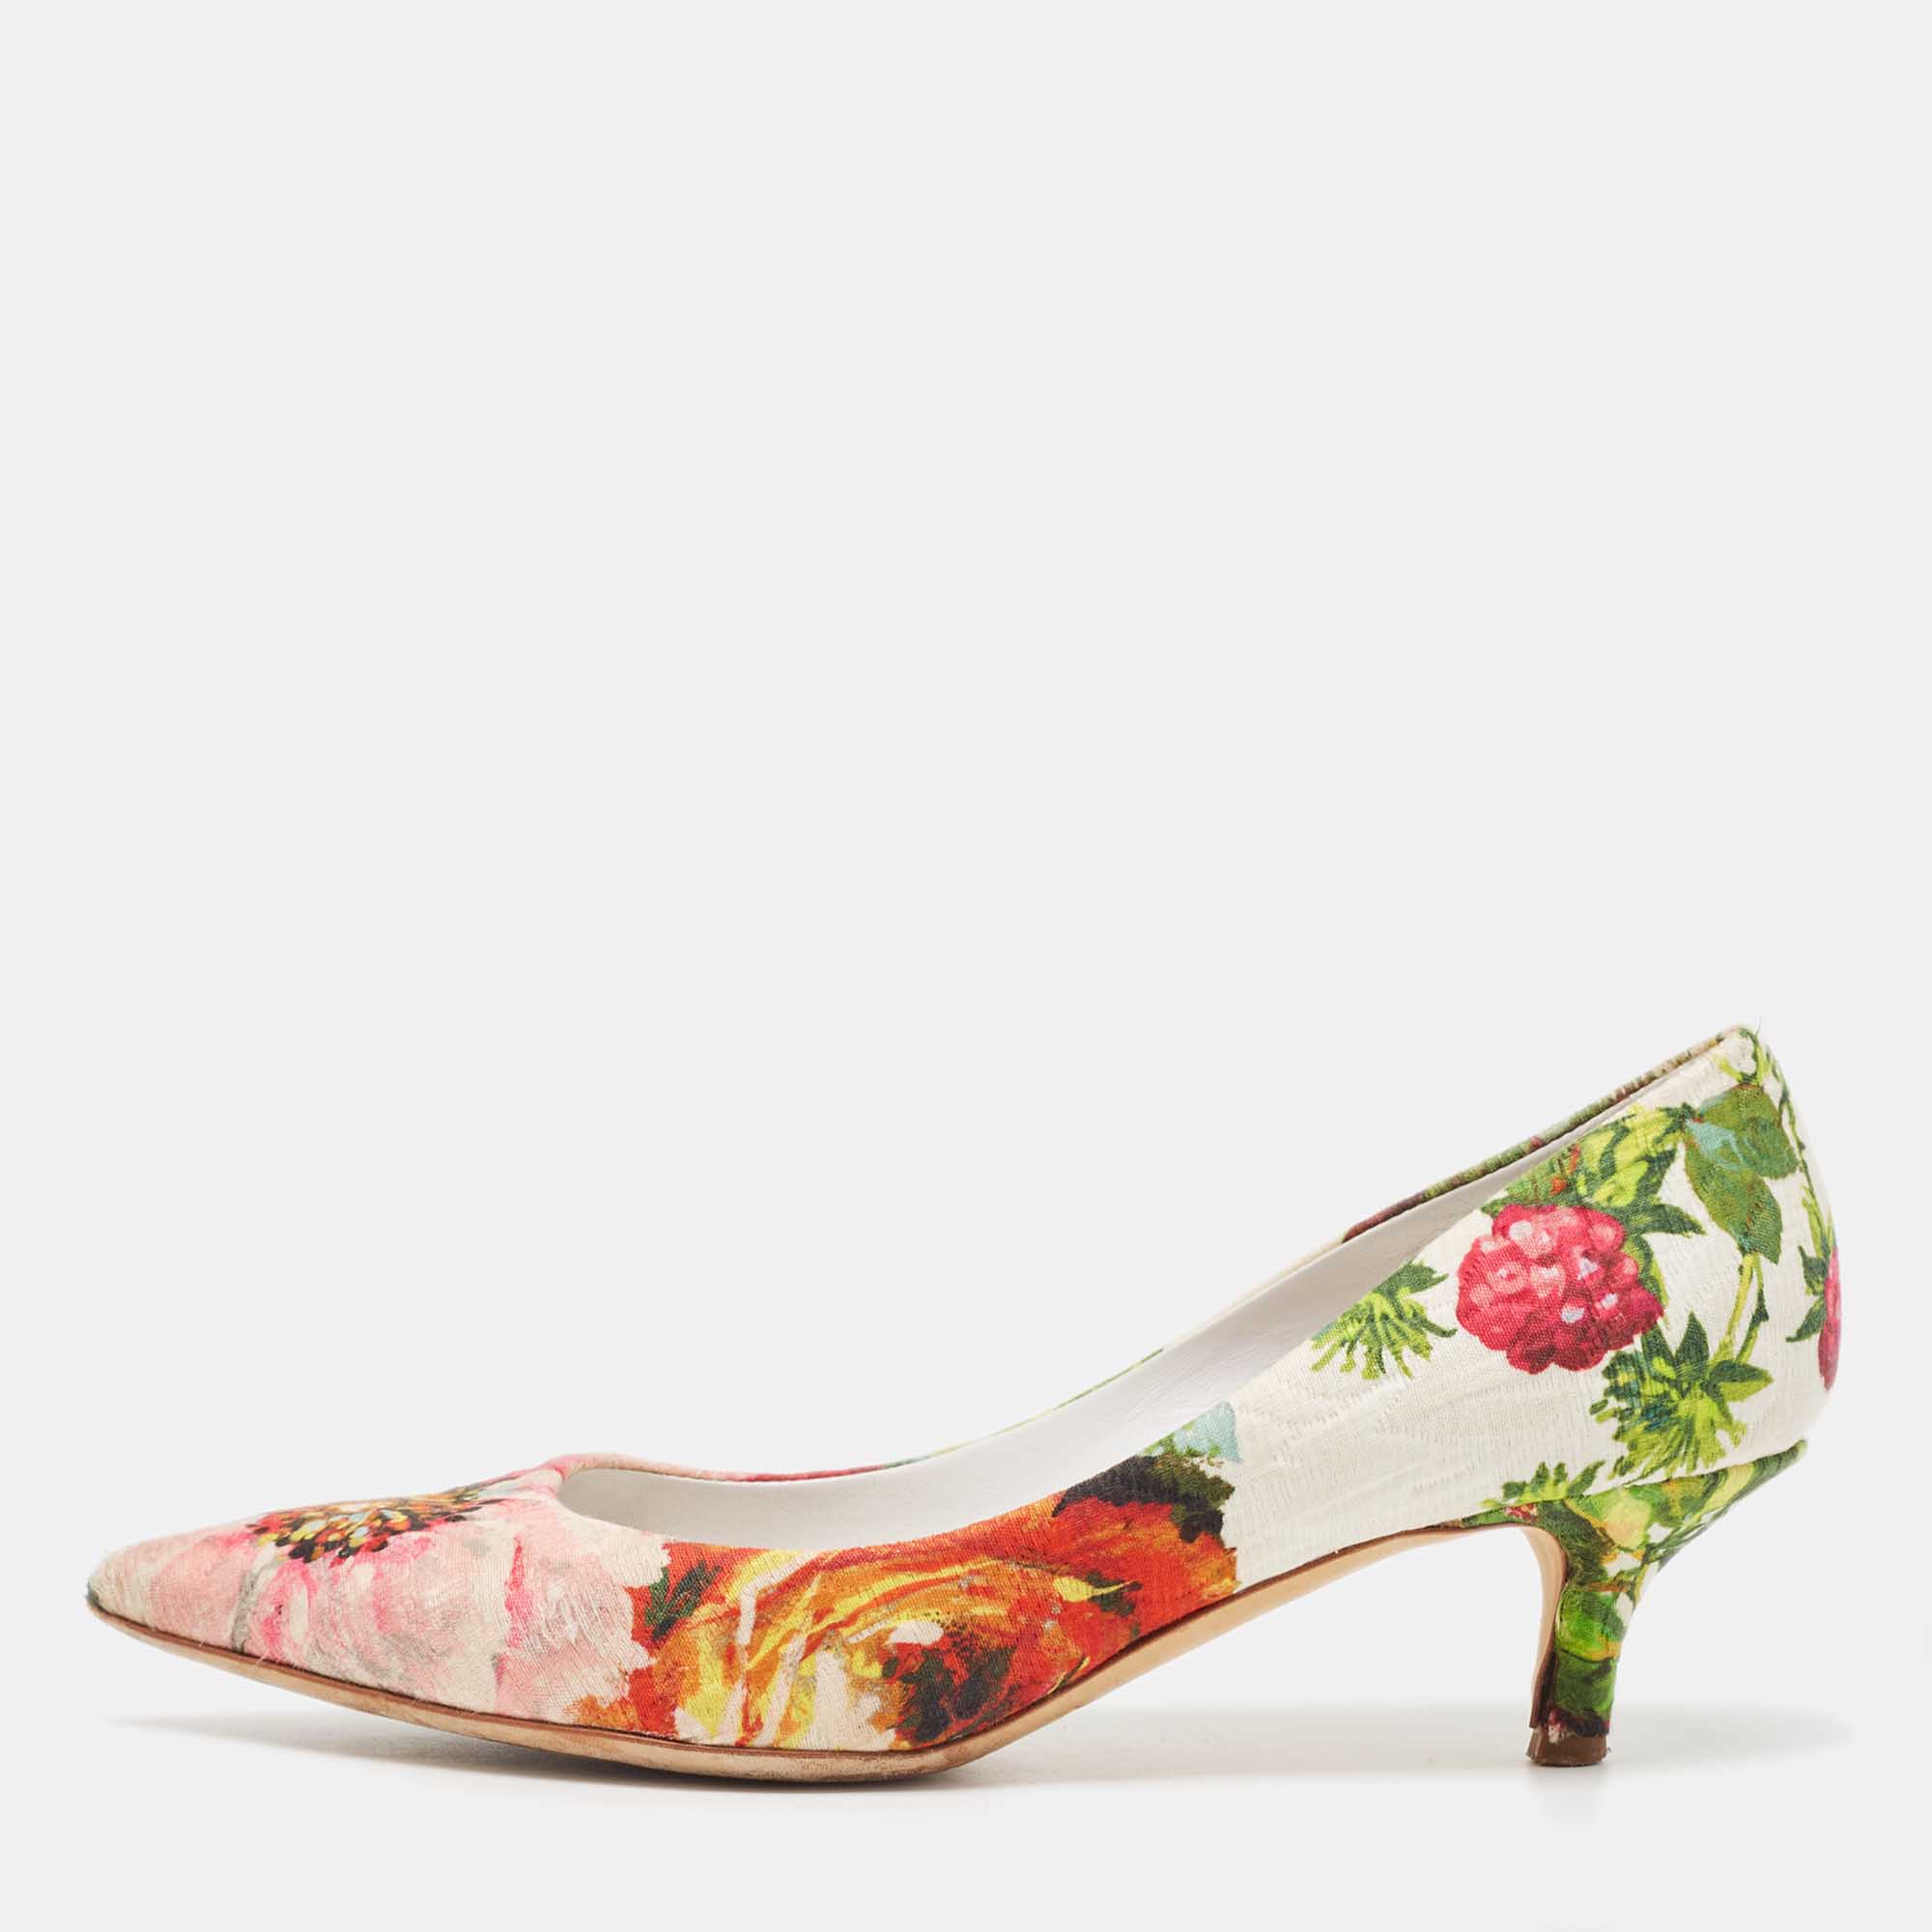 Dolce & Gabbana Multicolor Brocade Fabric Floral Print Pointed Toe Pumps Size 36